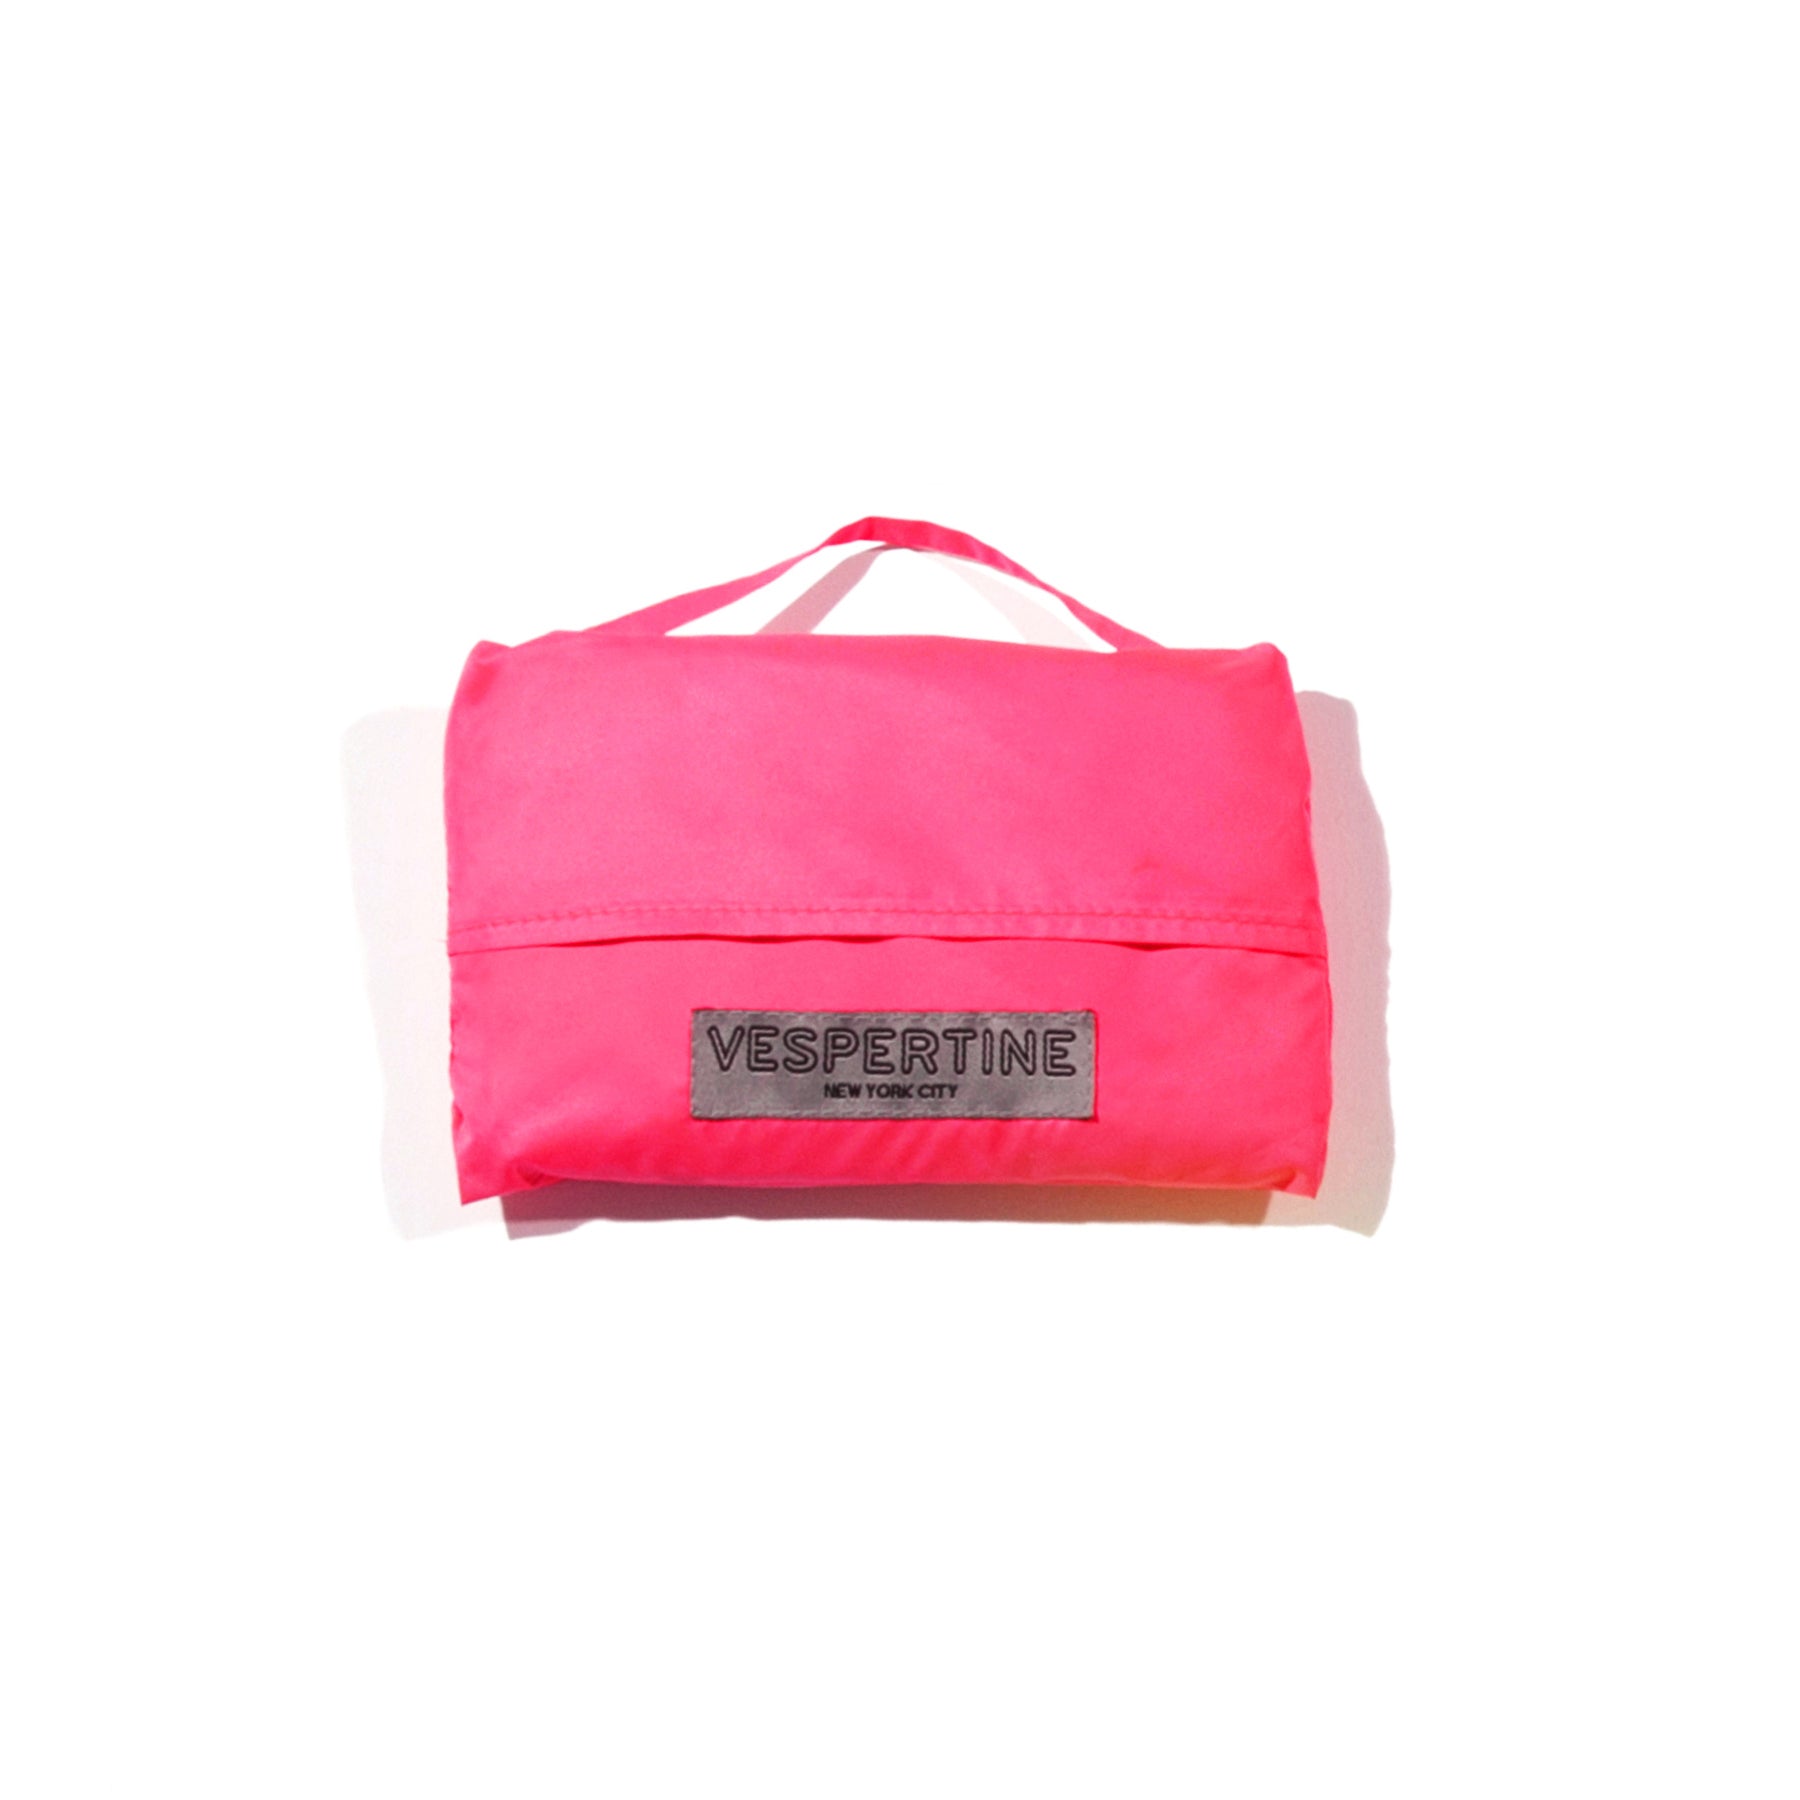 shown packed in cute pouch a vespert eco cotton candy neon pink stylish reflective hi vis safety vest for women reflecting clothing high visibility gear accessory womens fashion bike bike cycling walk run running dog walking walker night sustainable nighttime bright 3M scotchlite made in NYC USA designed to be seen  packable 